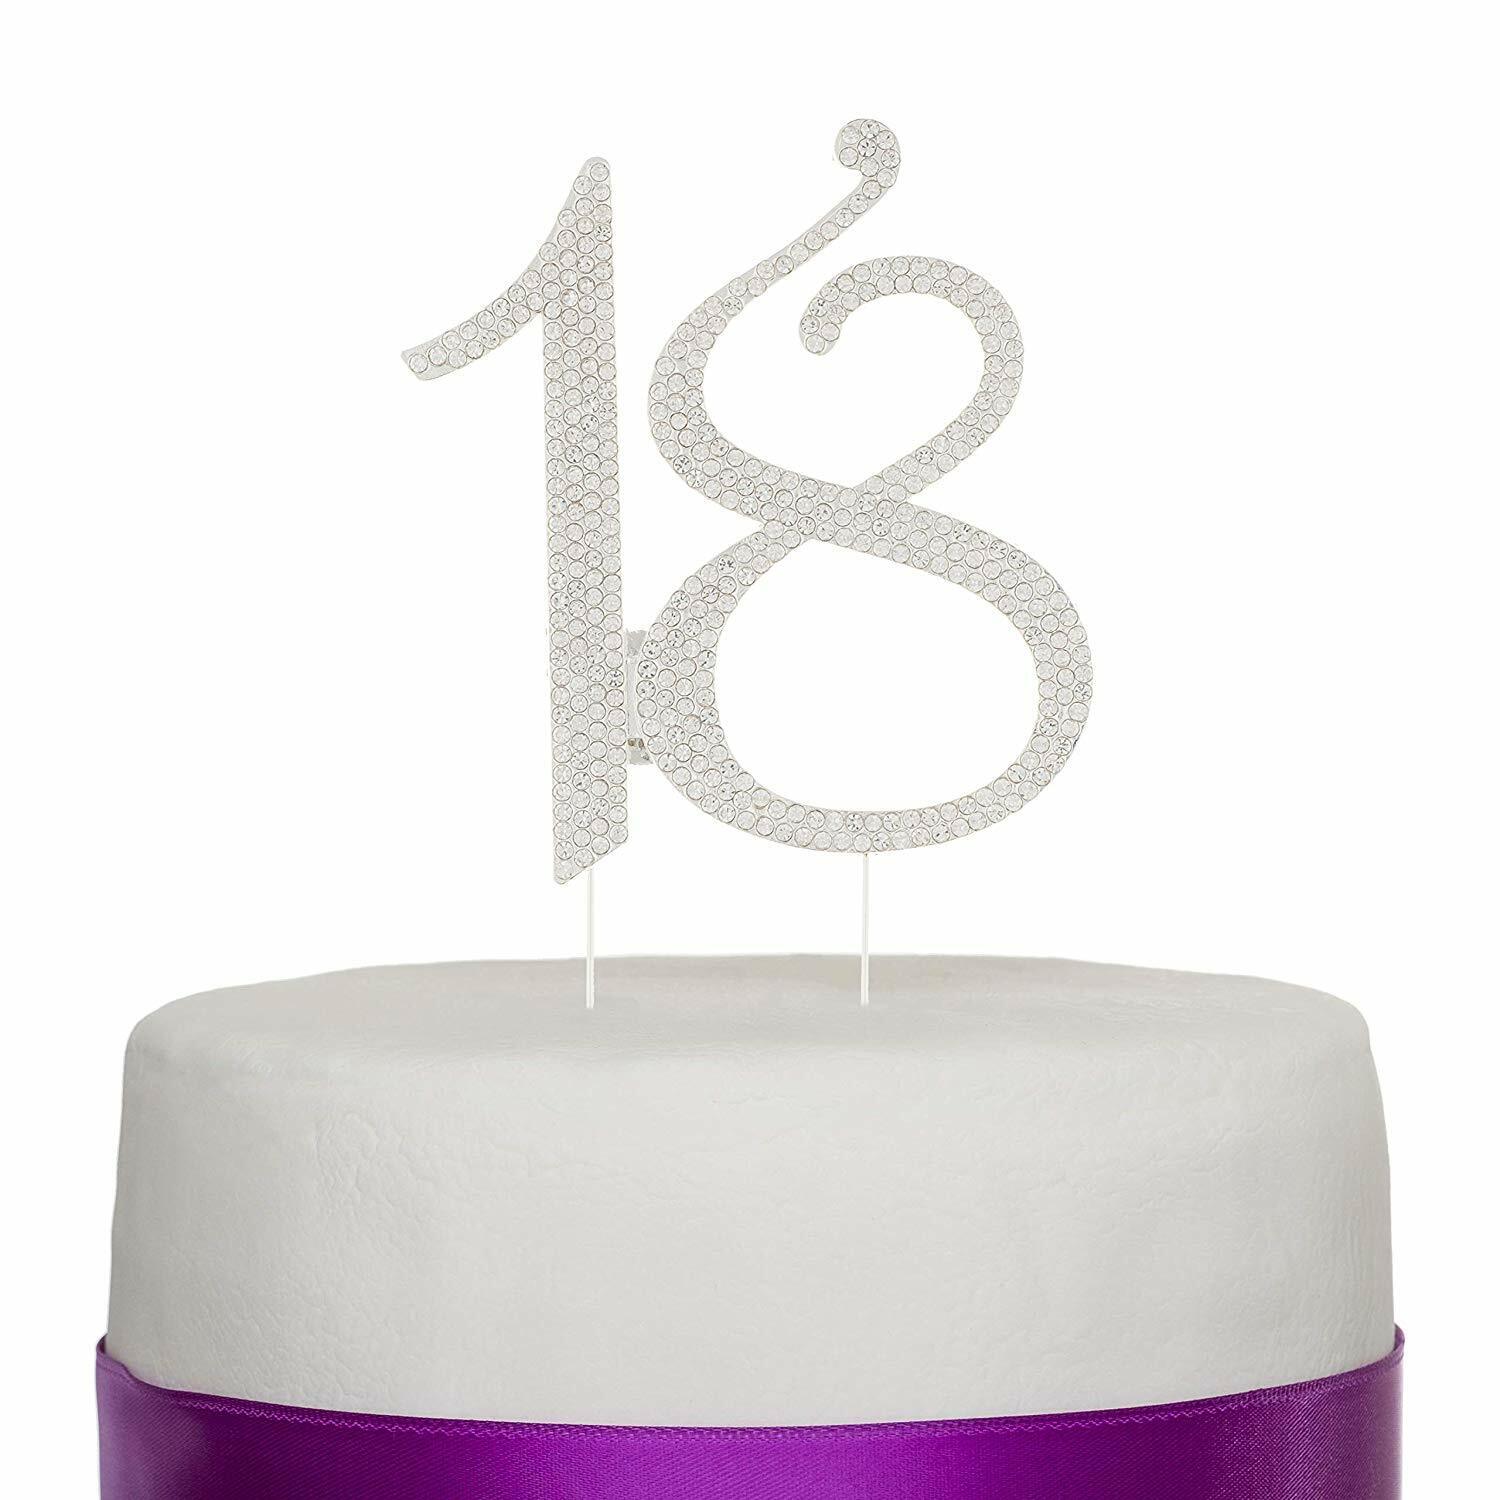 18 Cake Topper, 18th Birthday Party Silver Decoration